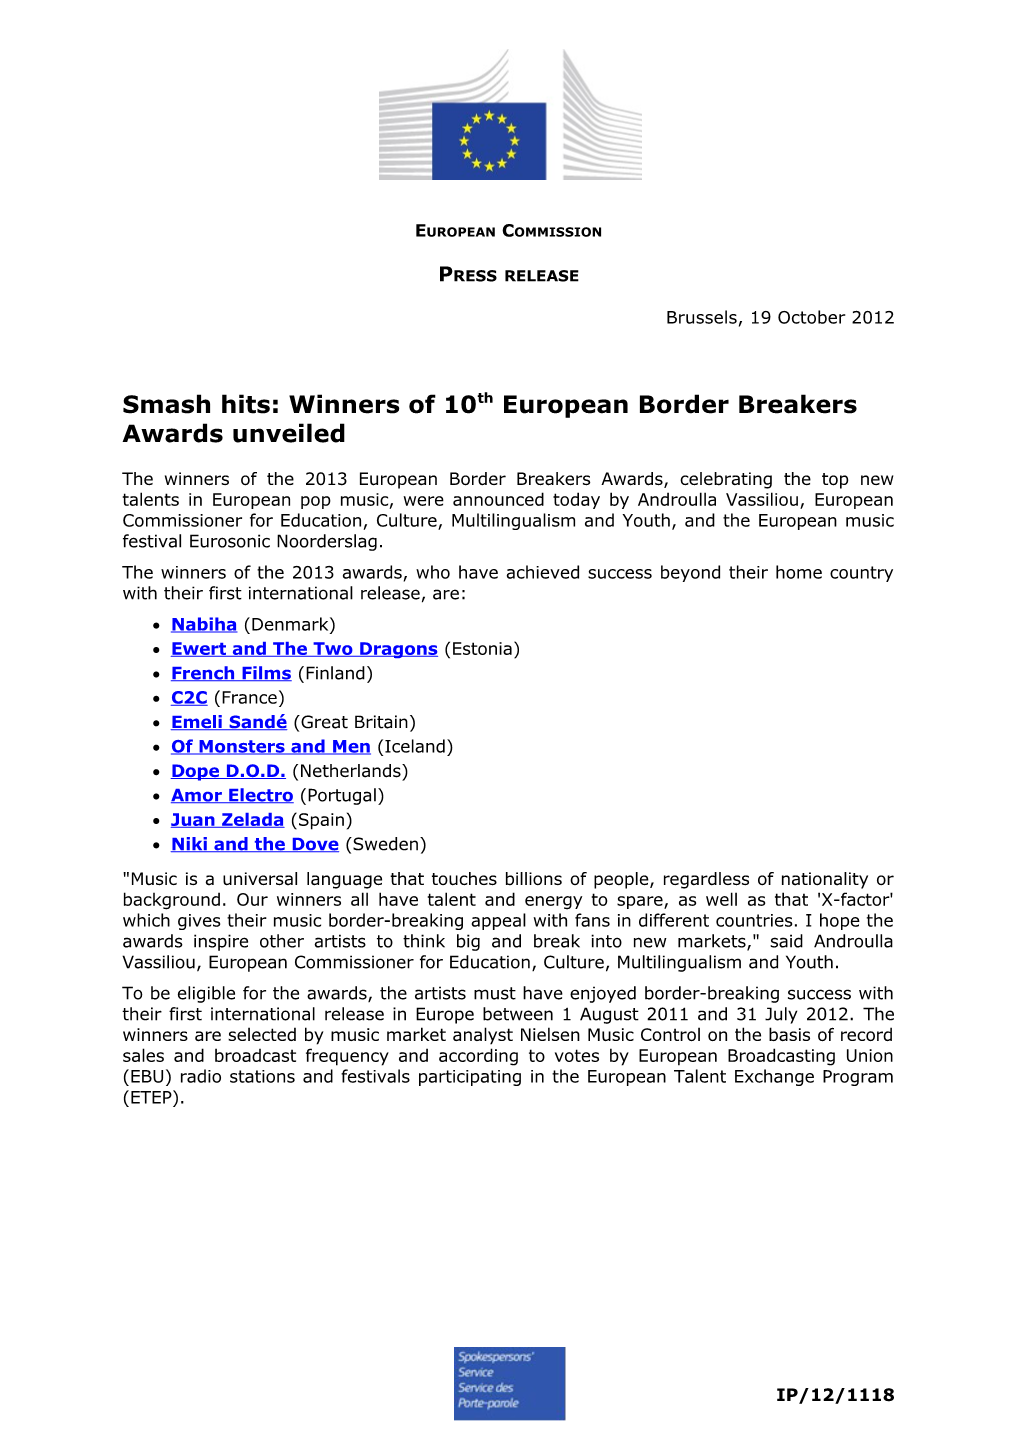 Smash Hits: Winners of 10Th European Border Breakers Awards Unveiled